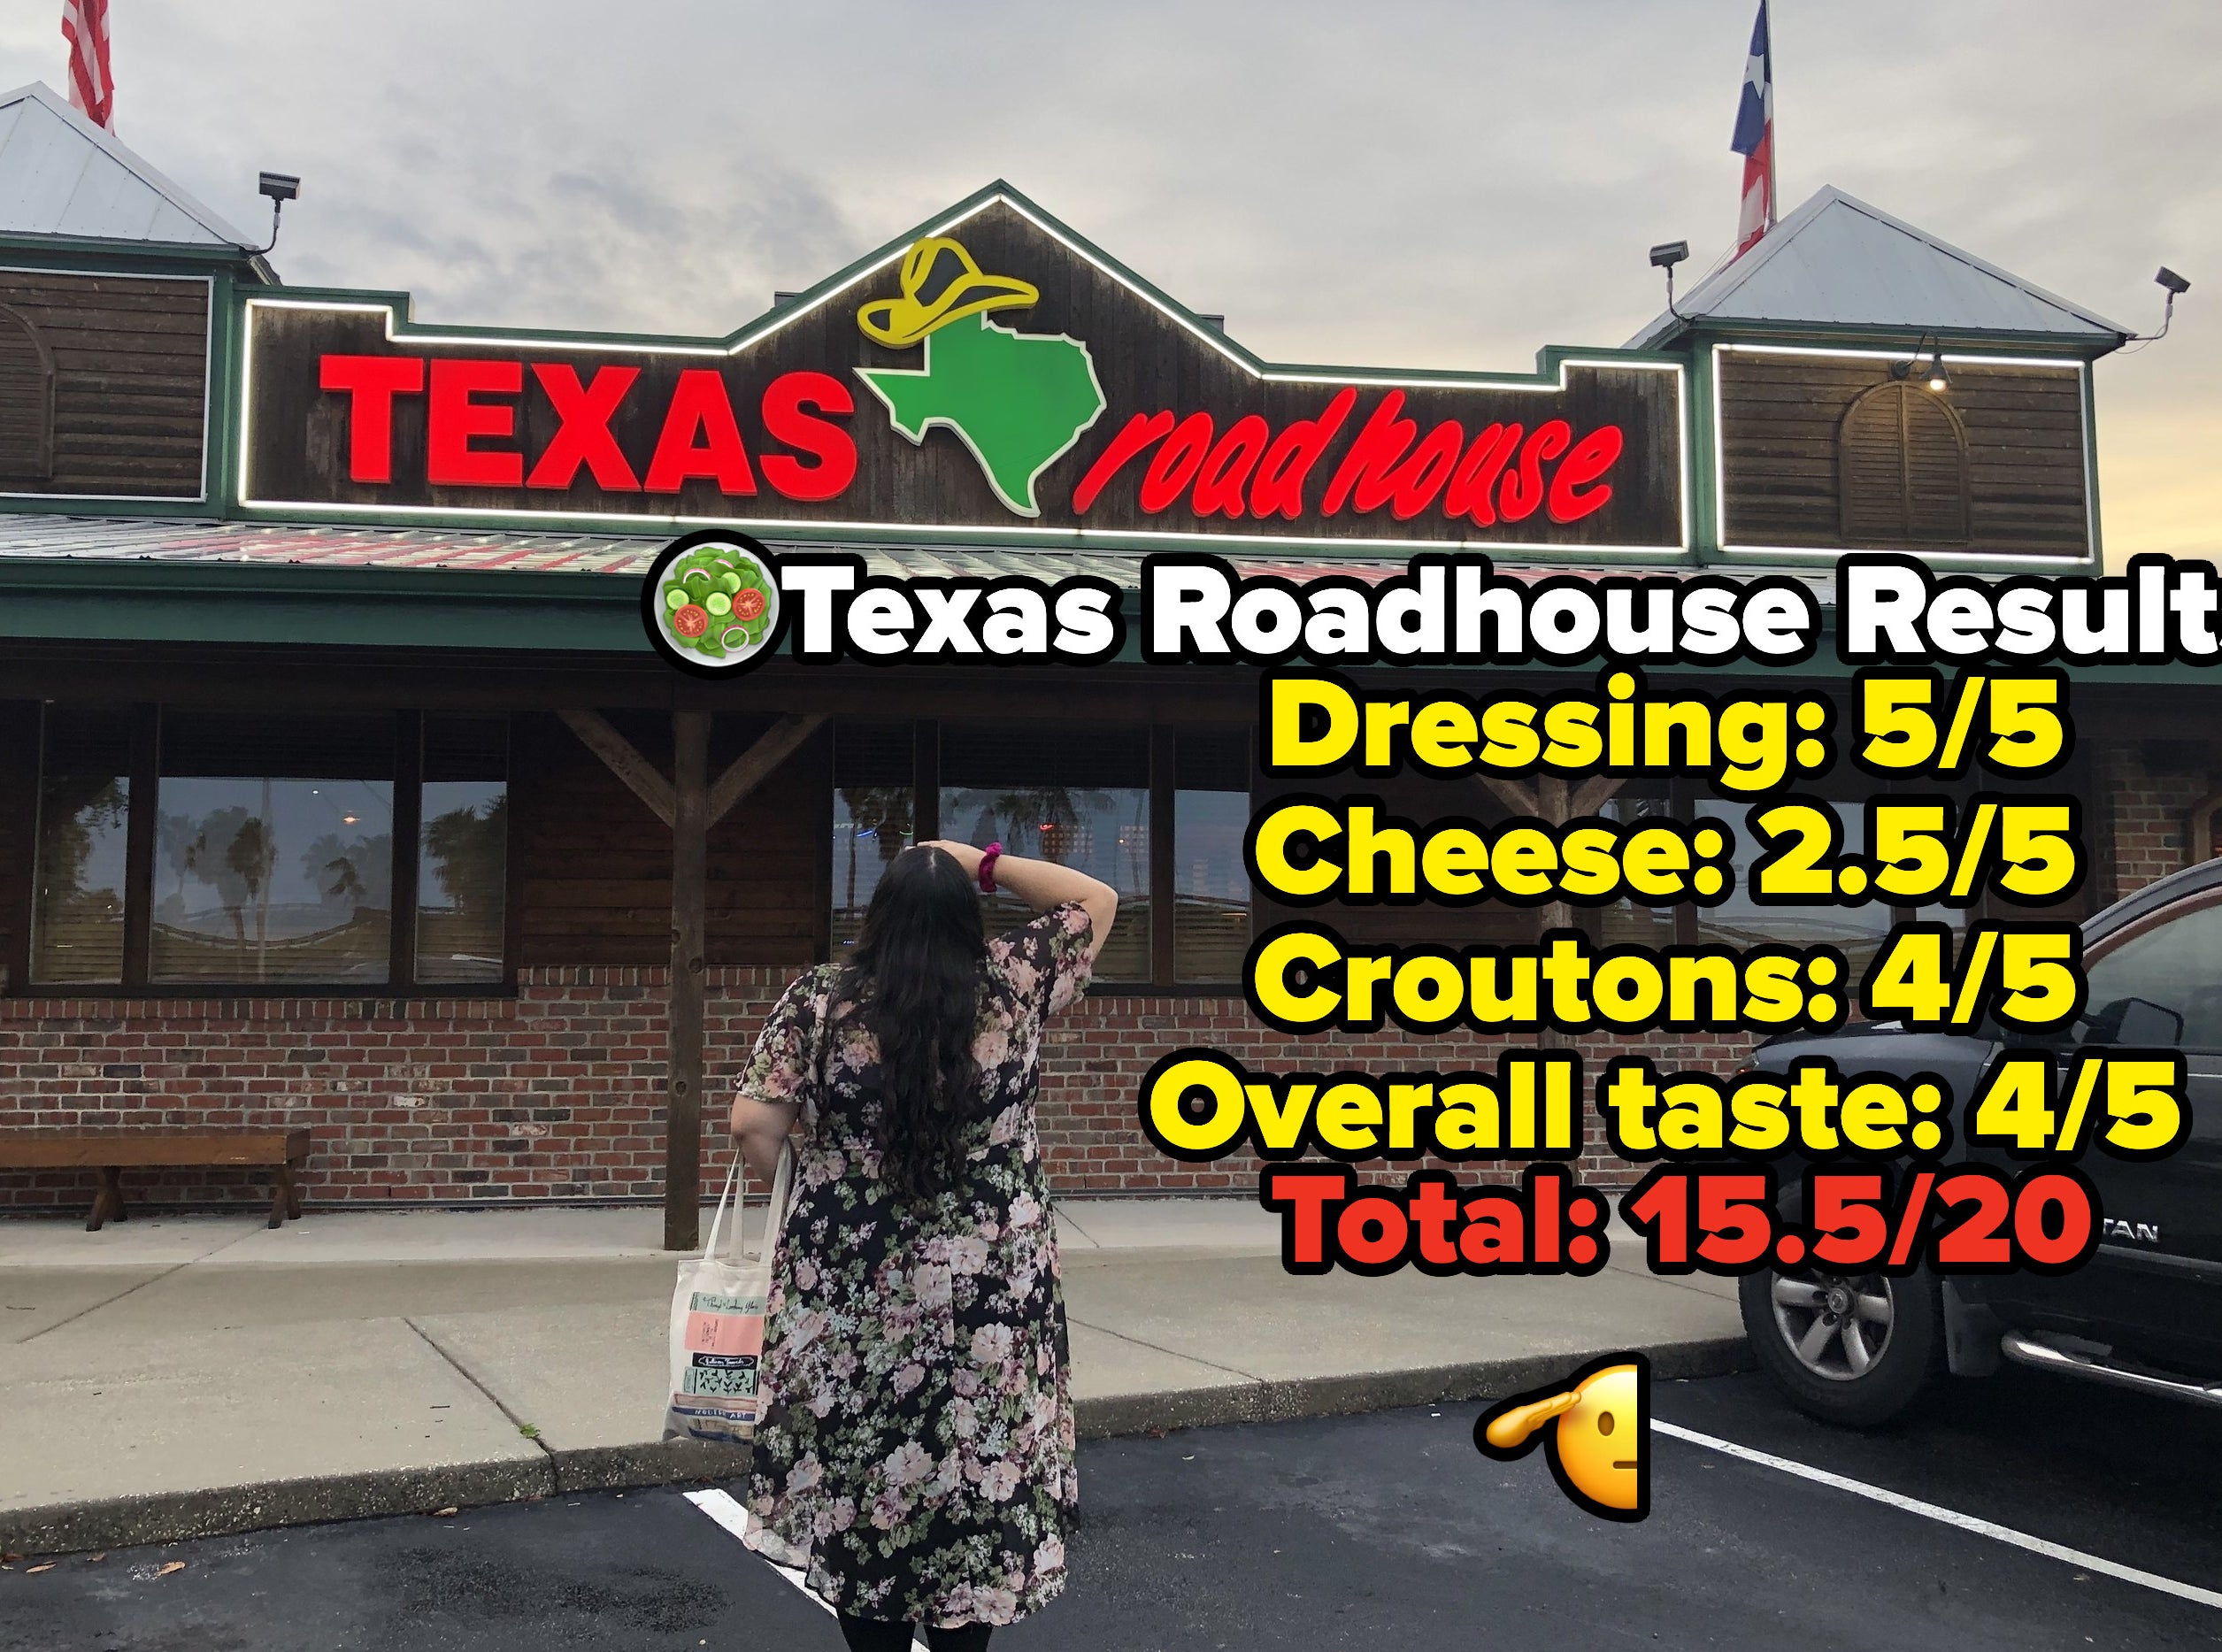 Photo of Texas roadhouse with text that says &quot;Texas Roadhouse Results: dressing 5/5, cheese 2.5/5, croutons 4/5, overall taste 4/5, total 15.5/20&quot;